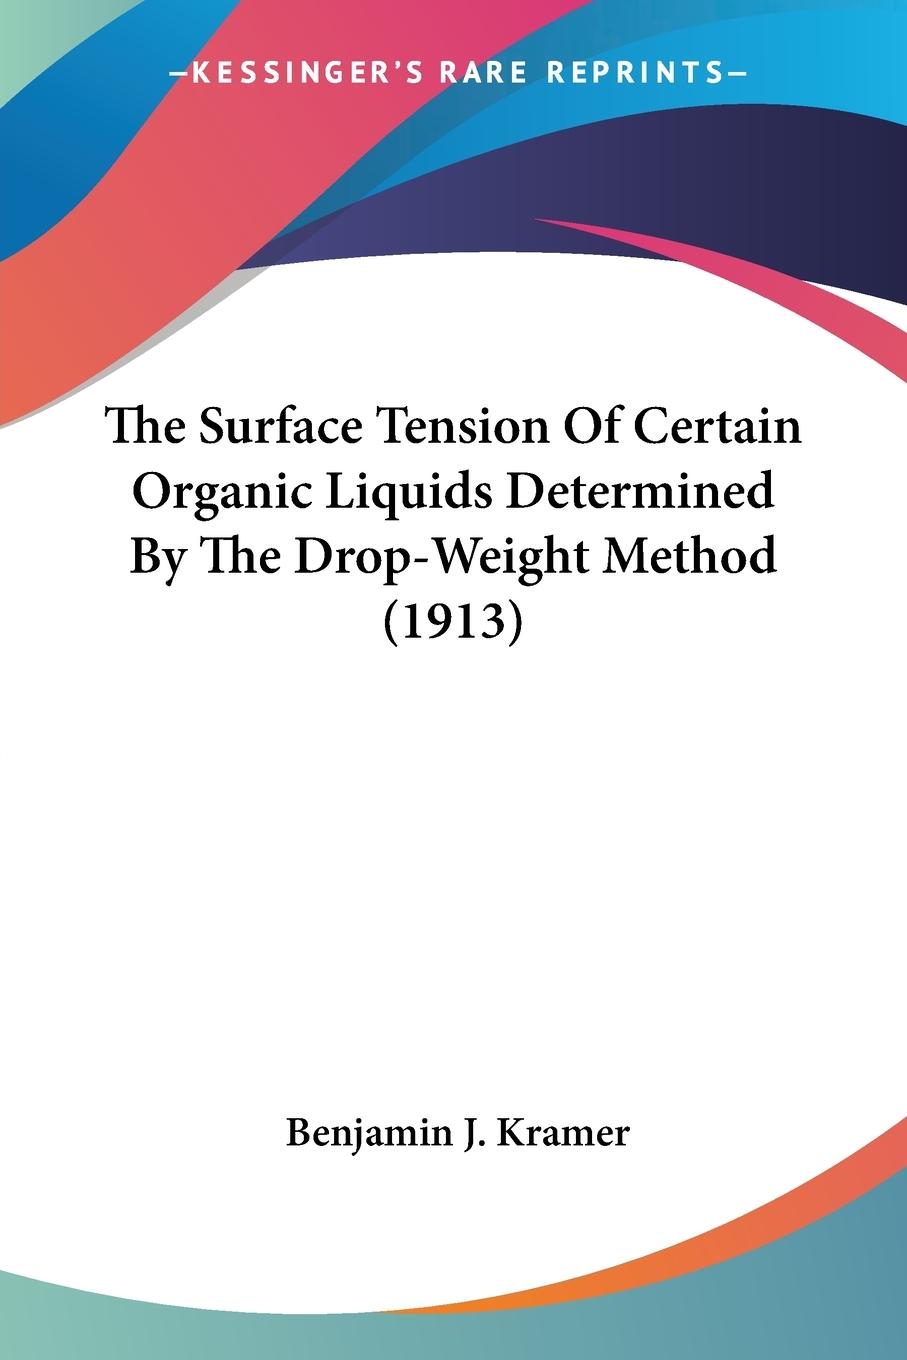 The Surface Tension Of Certain Organic Liquids Determined By The Drop-Weight Method (1913) - Kramer, Benjamin J.